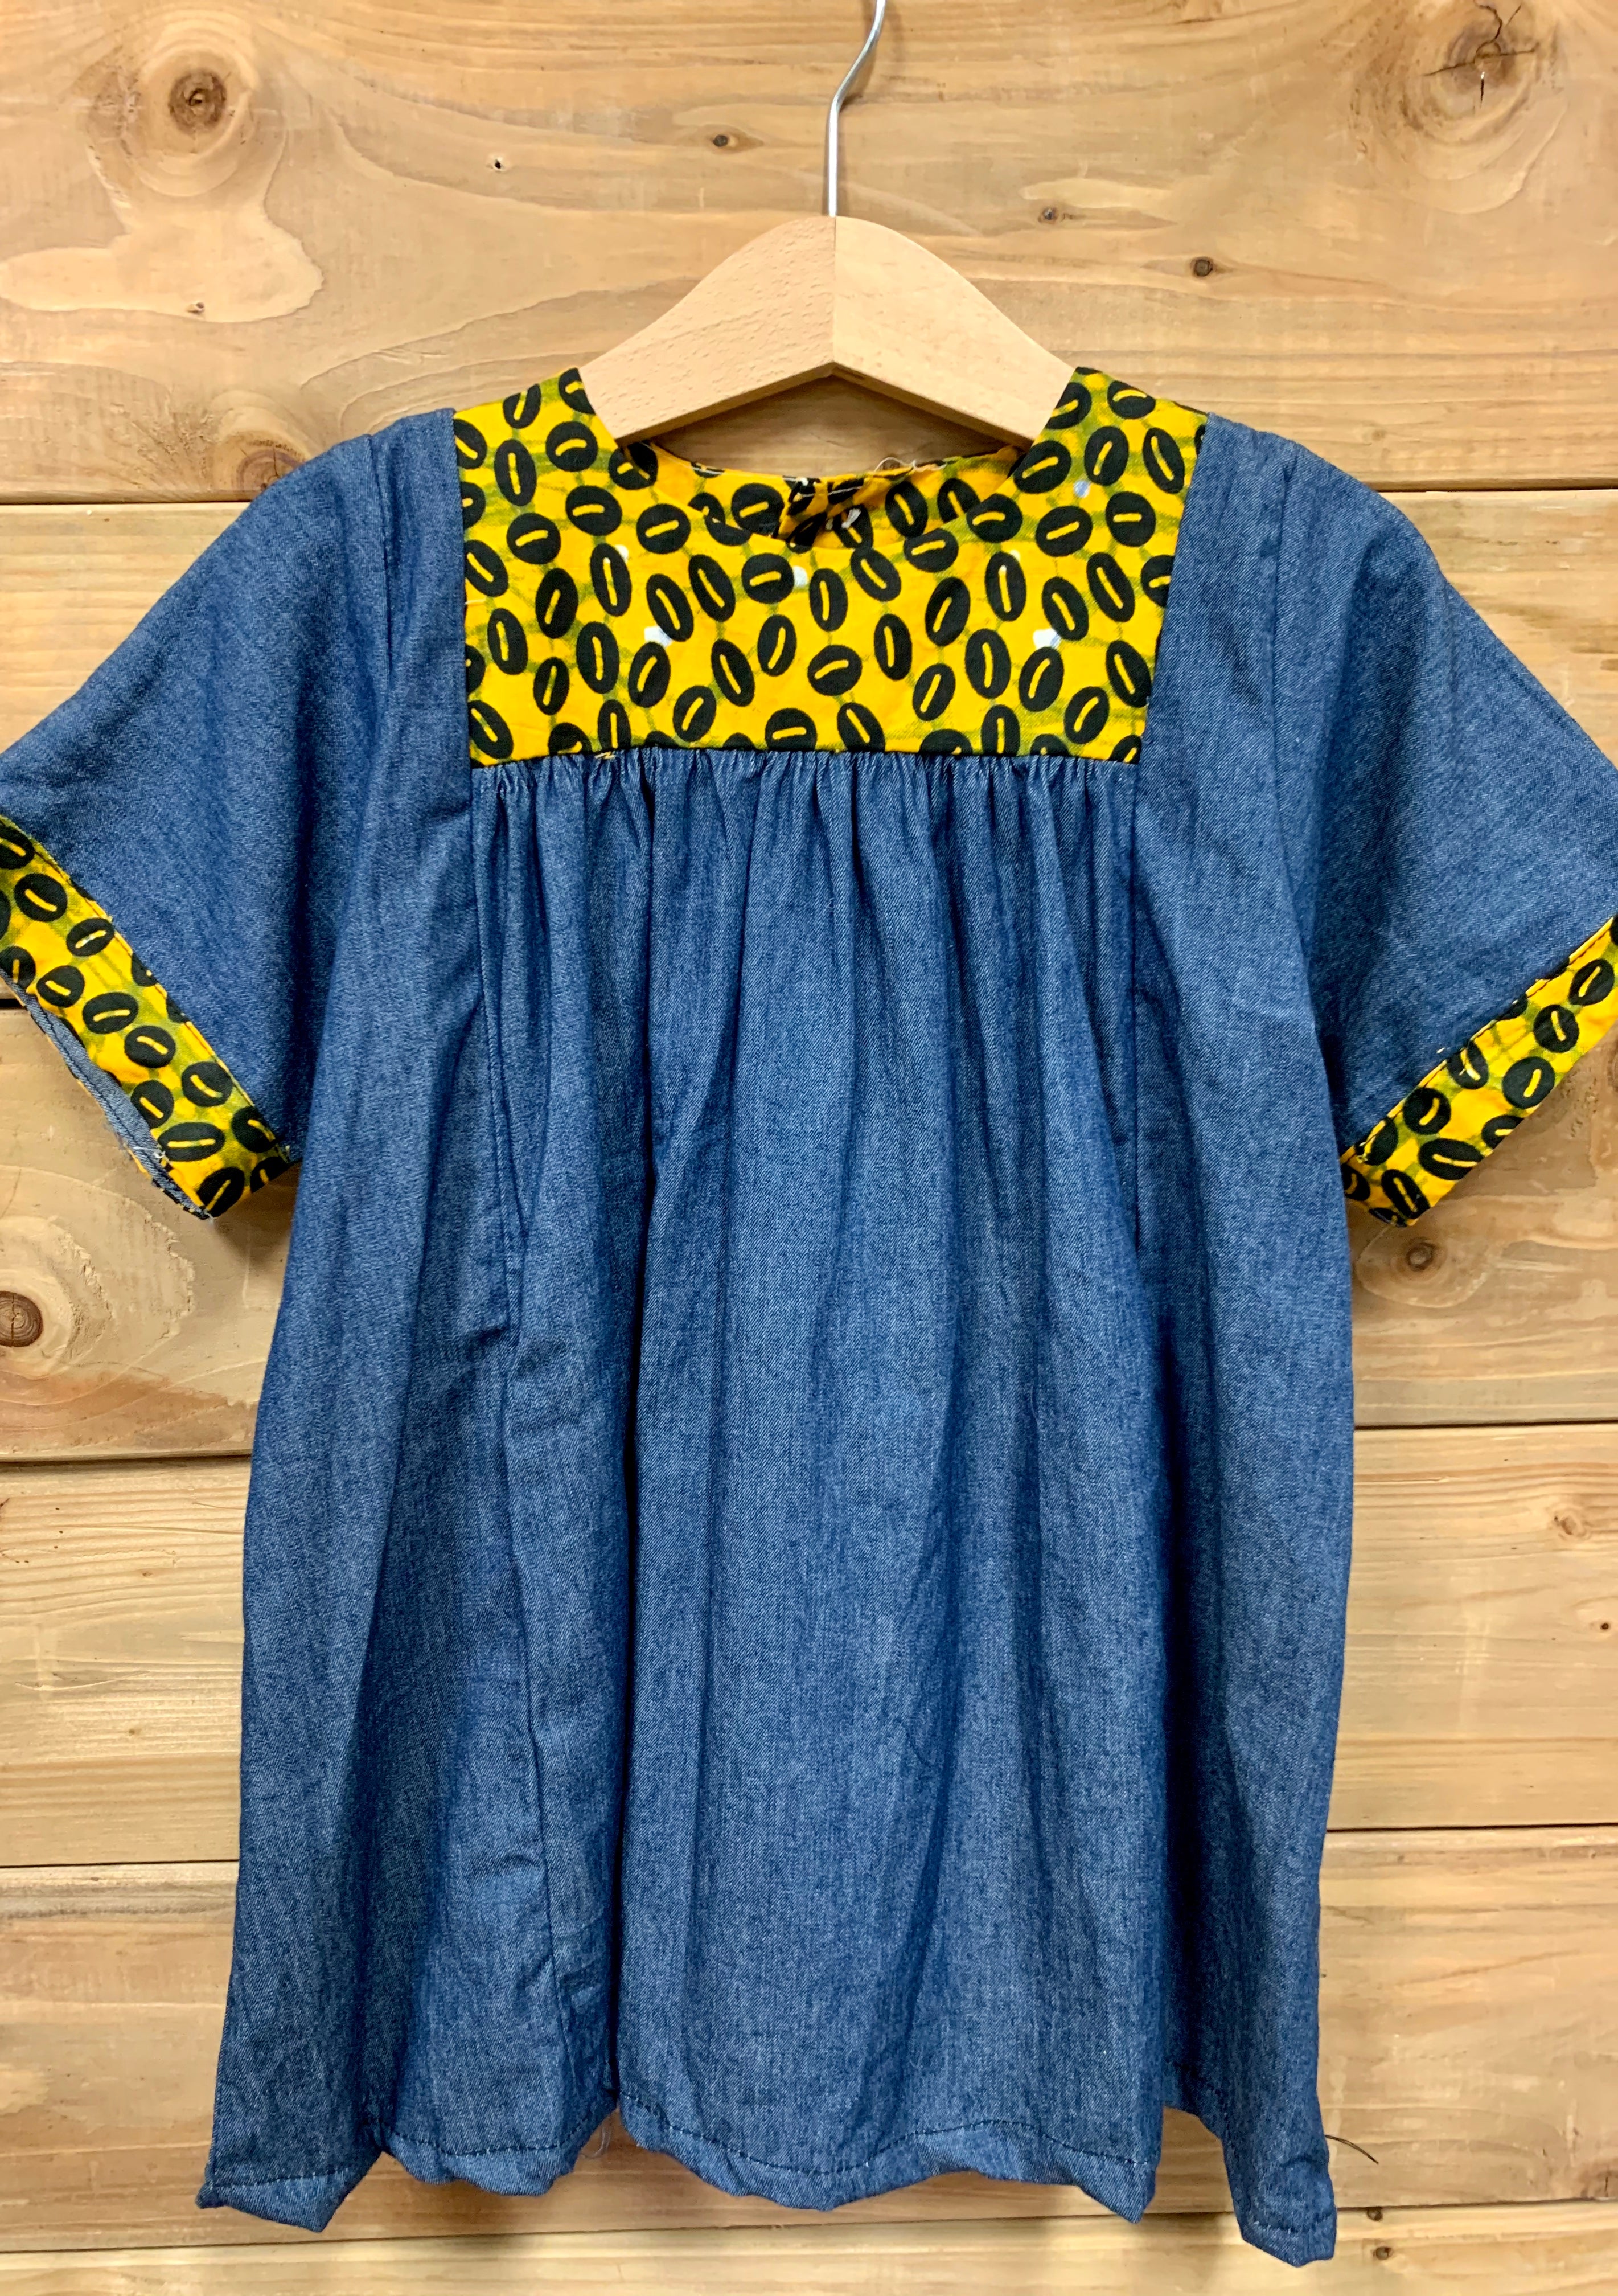 JustOne's small blue dress with design around the collar and cuffs of the sleeves, hand-sewn in Uganda